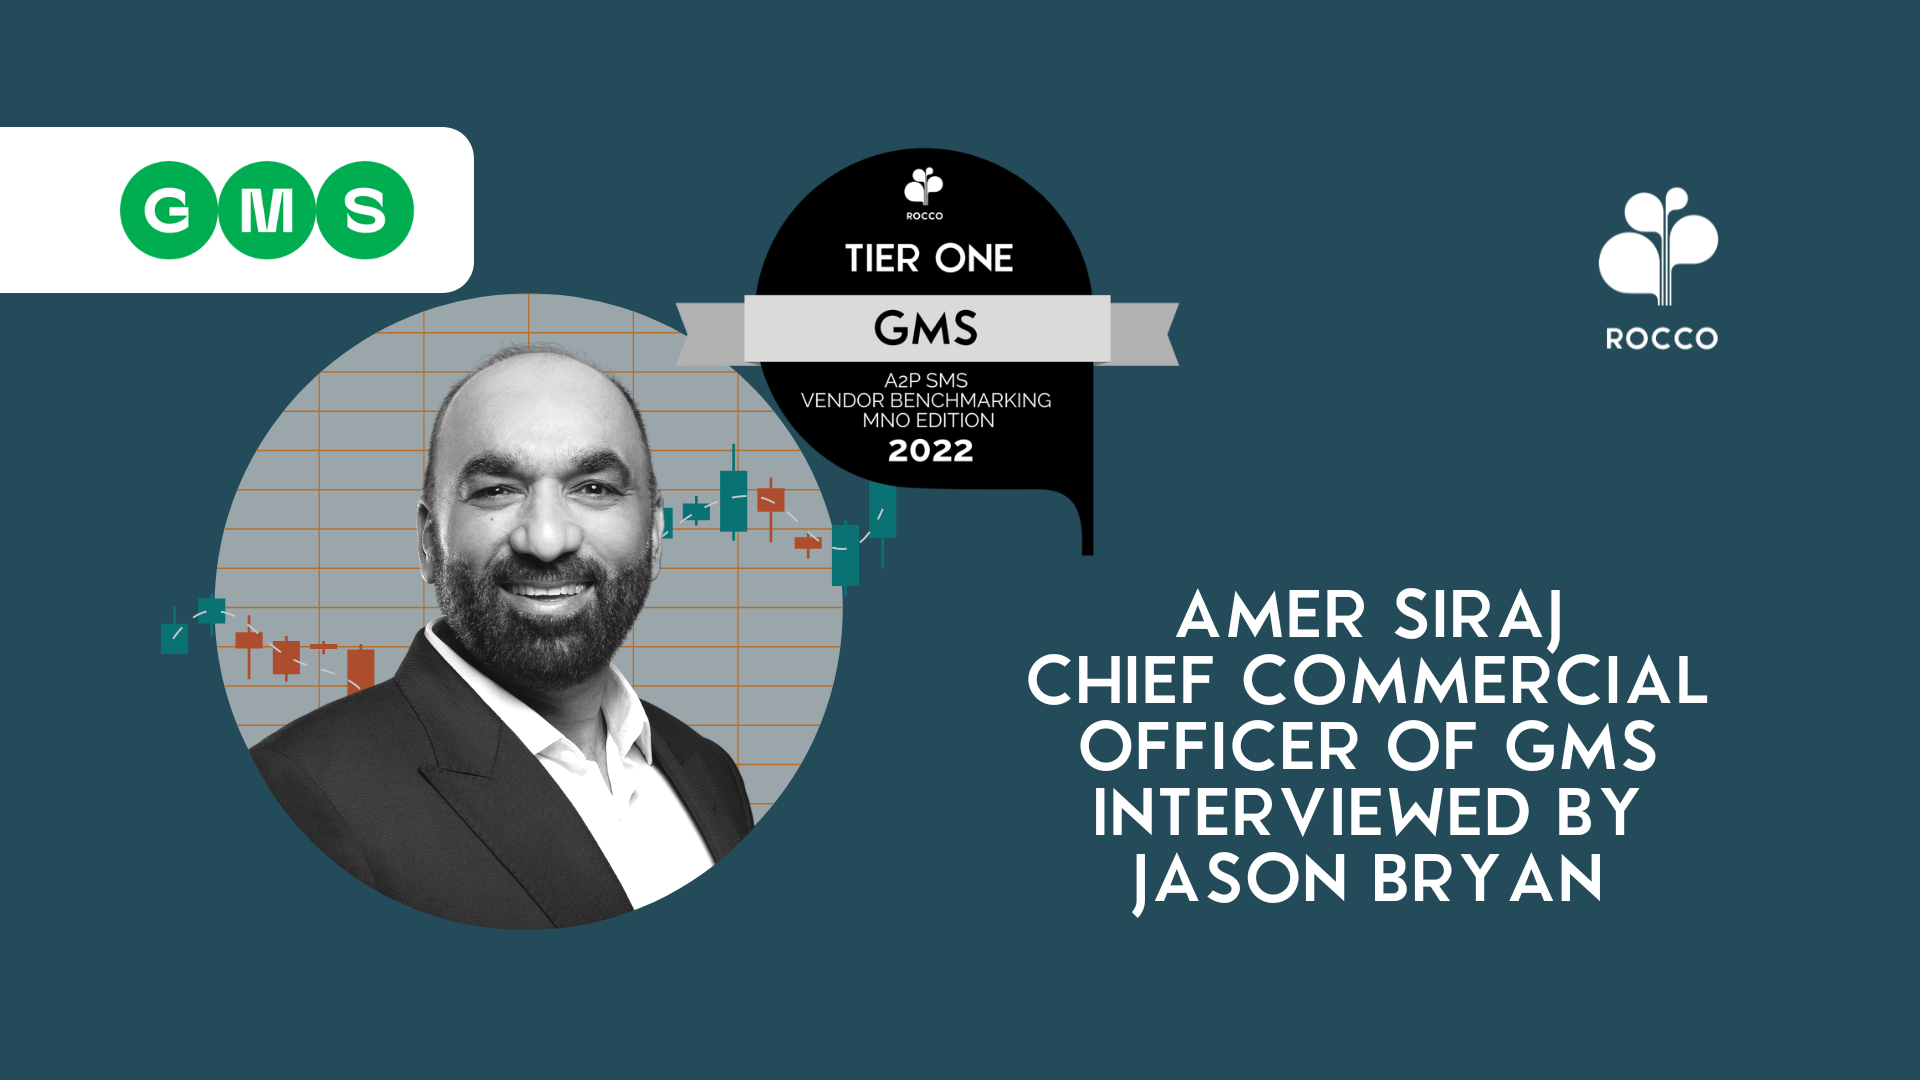 Amer Siraj, Chief Commercial Officer of GMS, interviewed by Jason Bryan